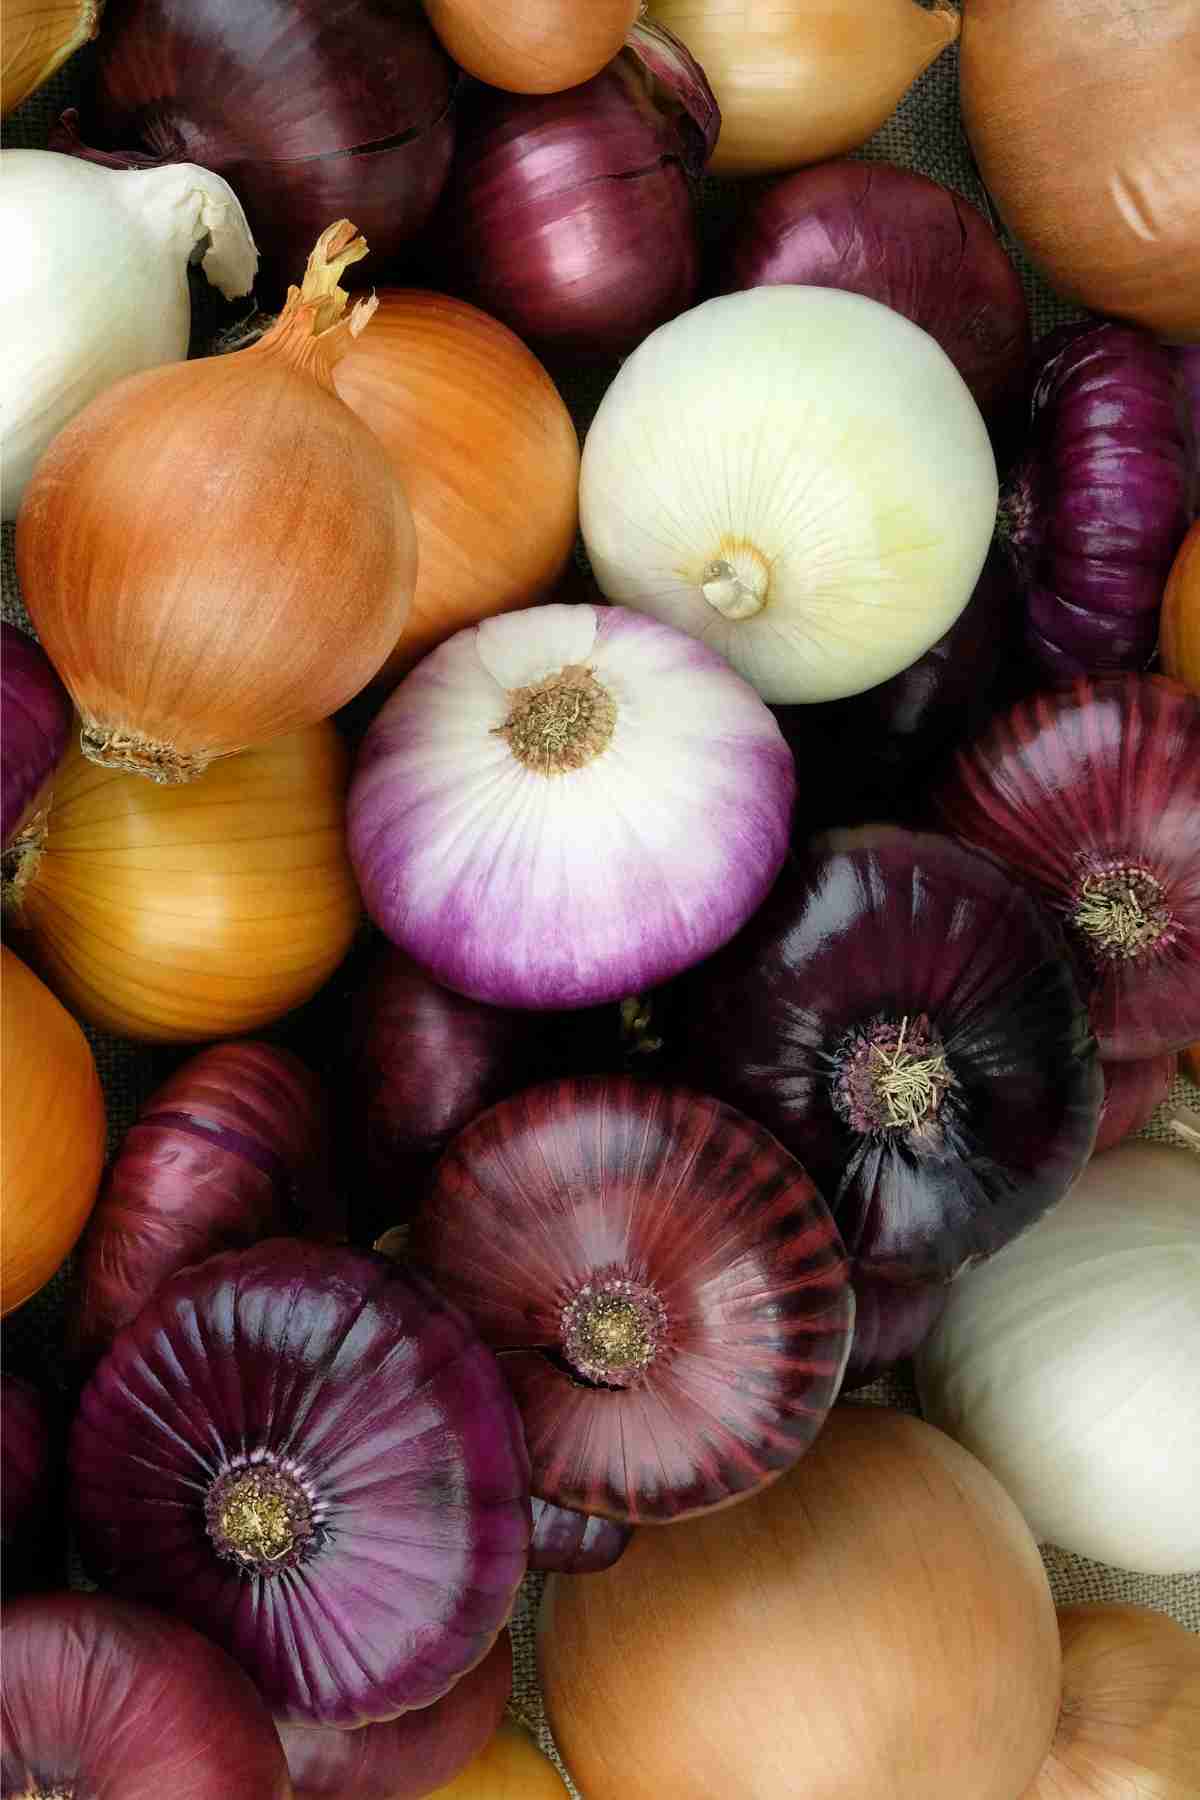 nutritional value of onions